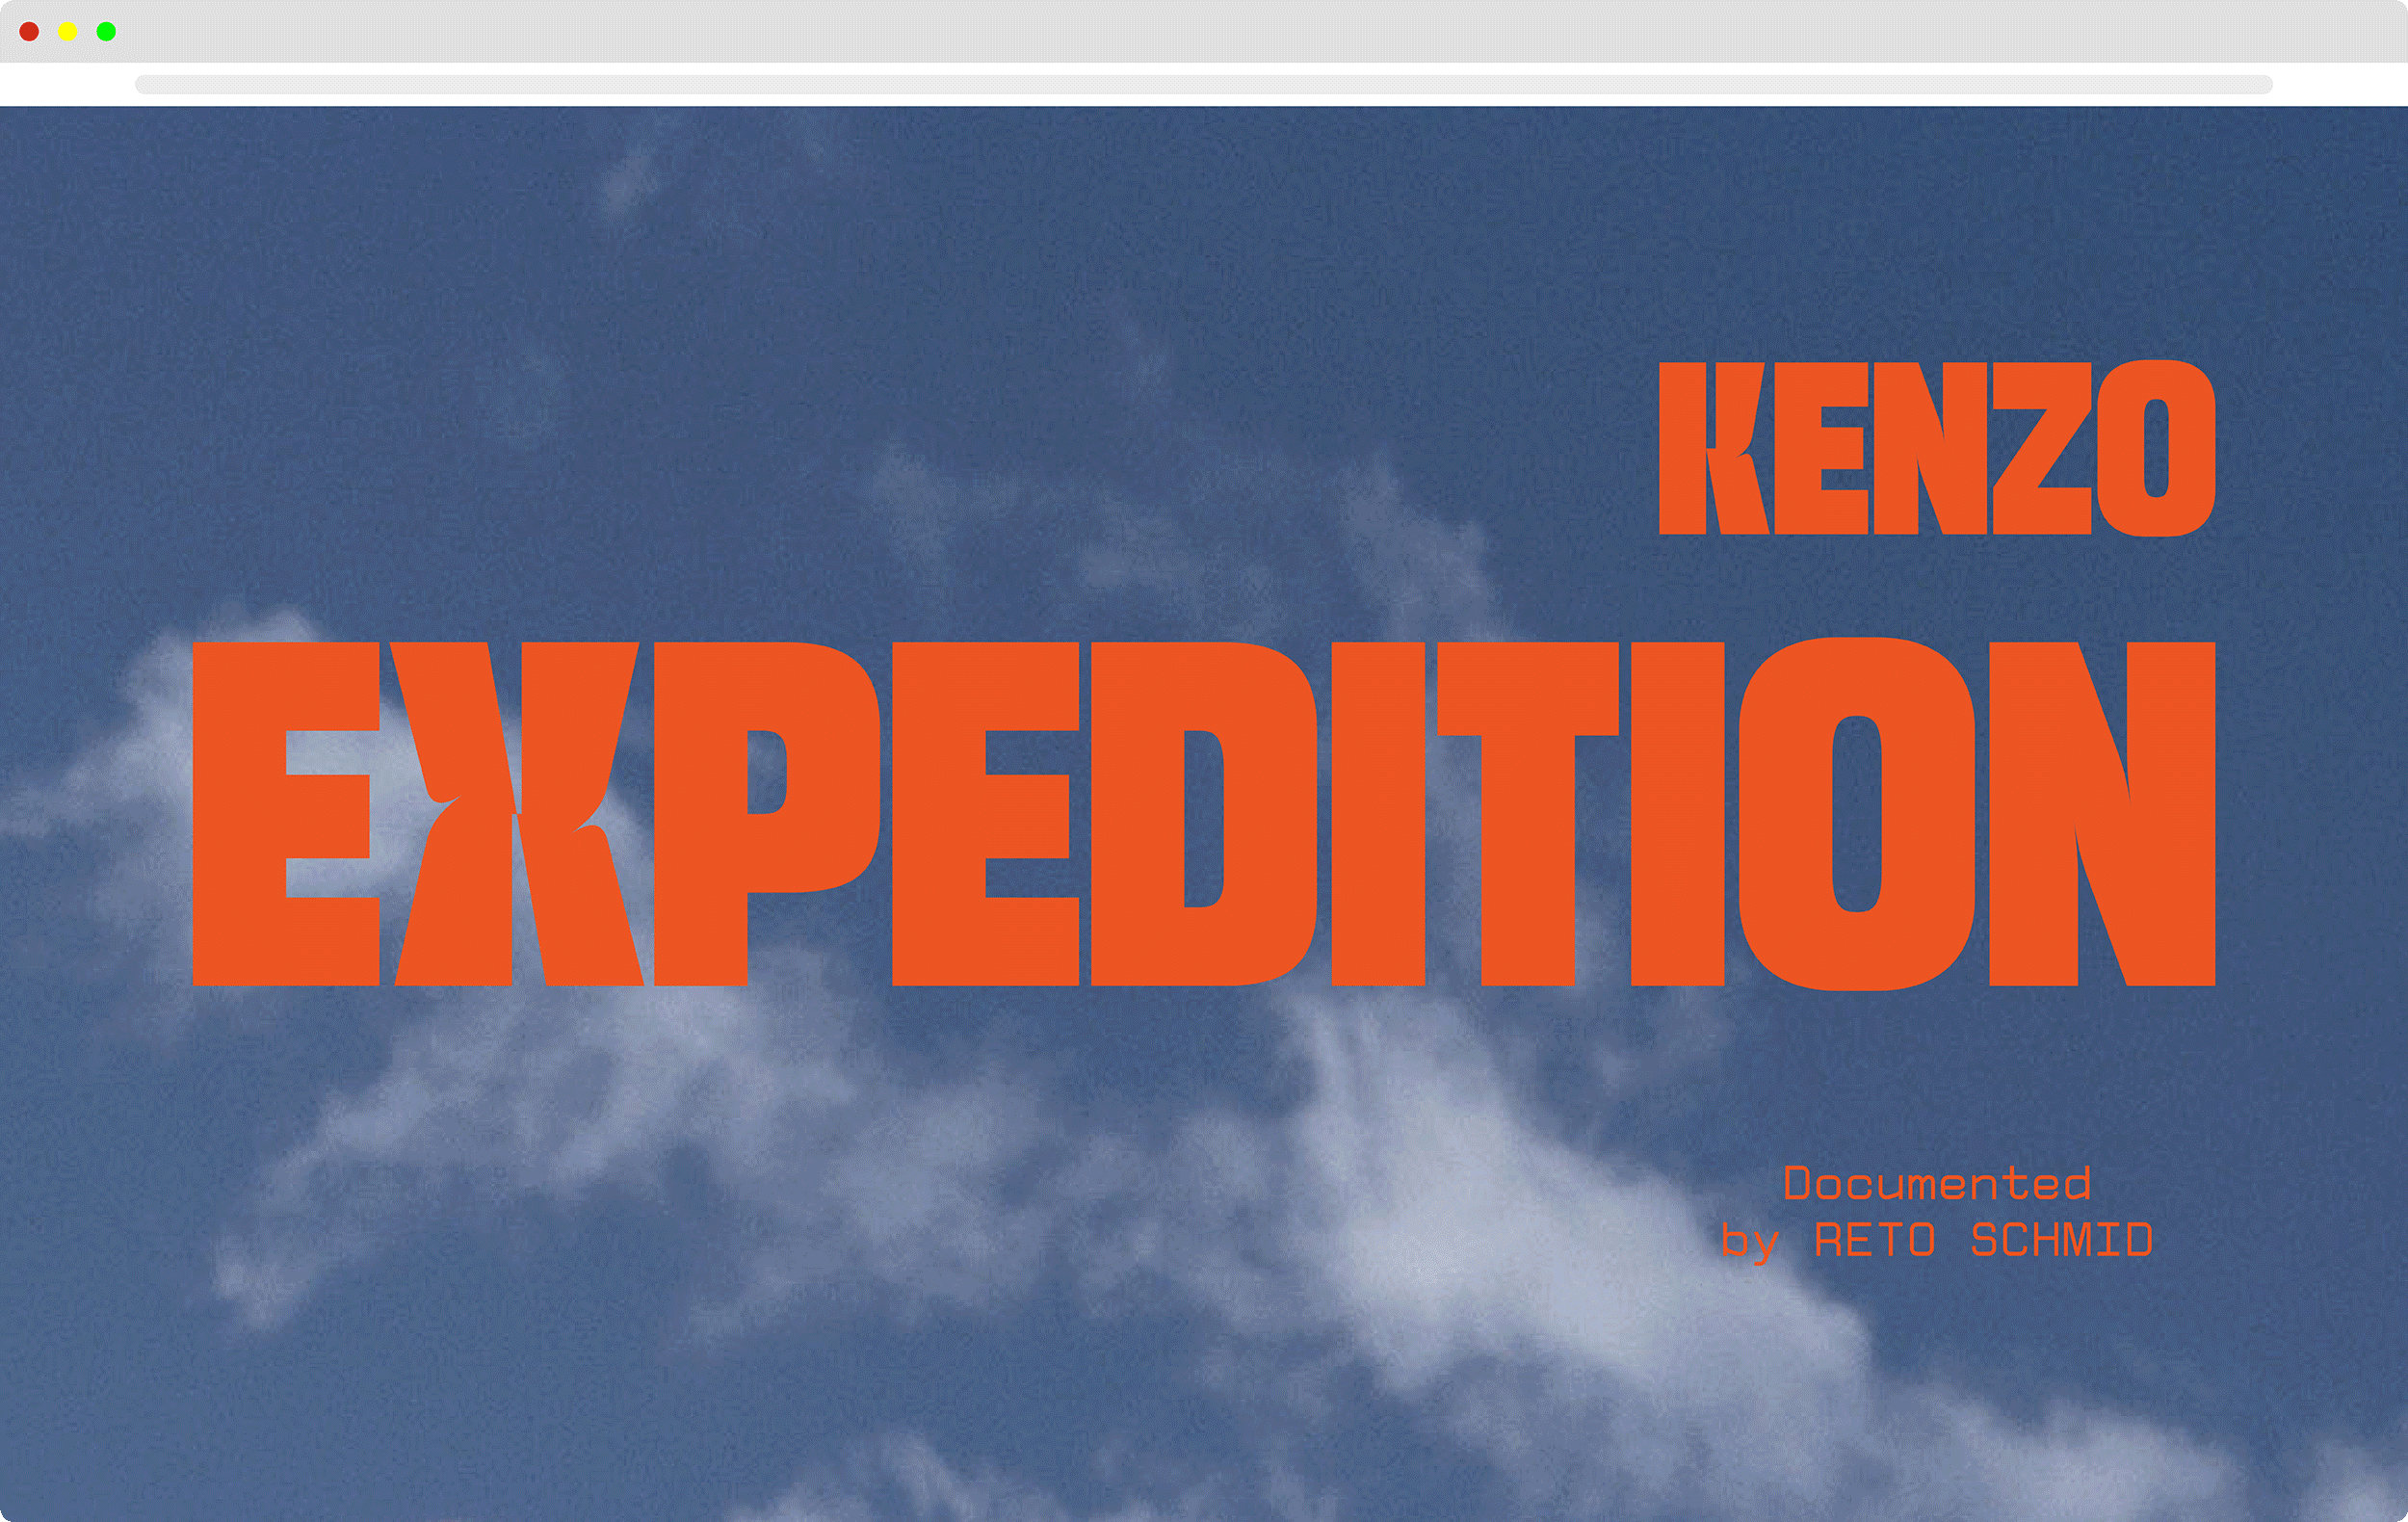 Kenzo Expedition